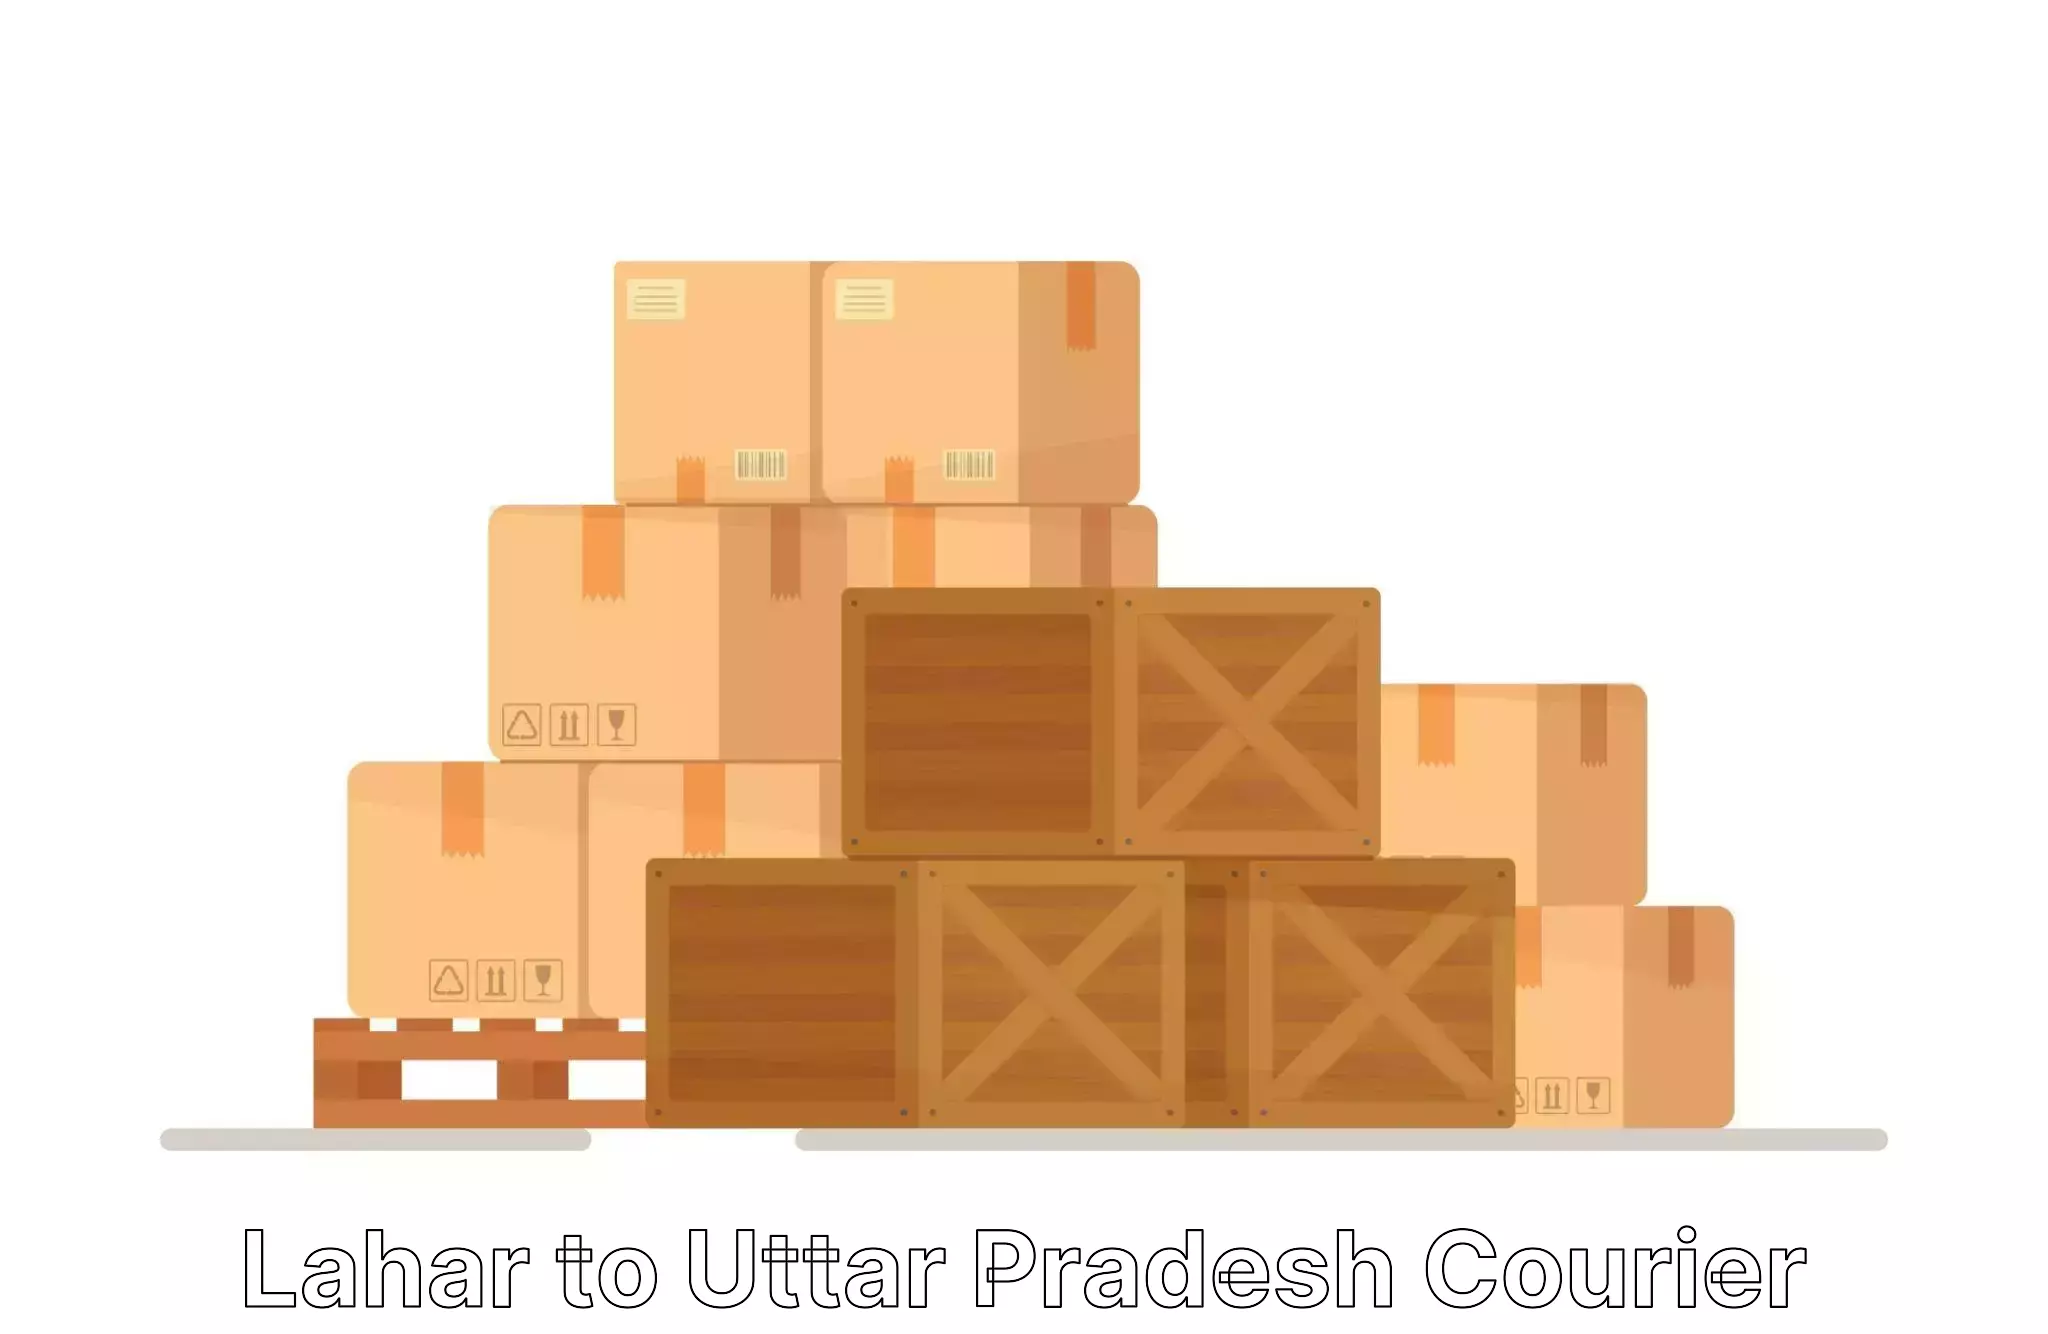 Doorstep moving services Lahar to Noida